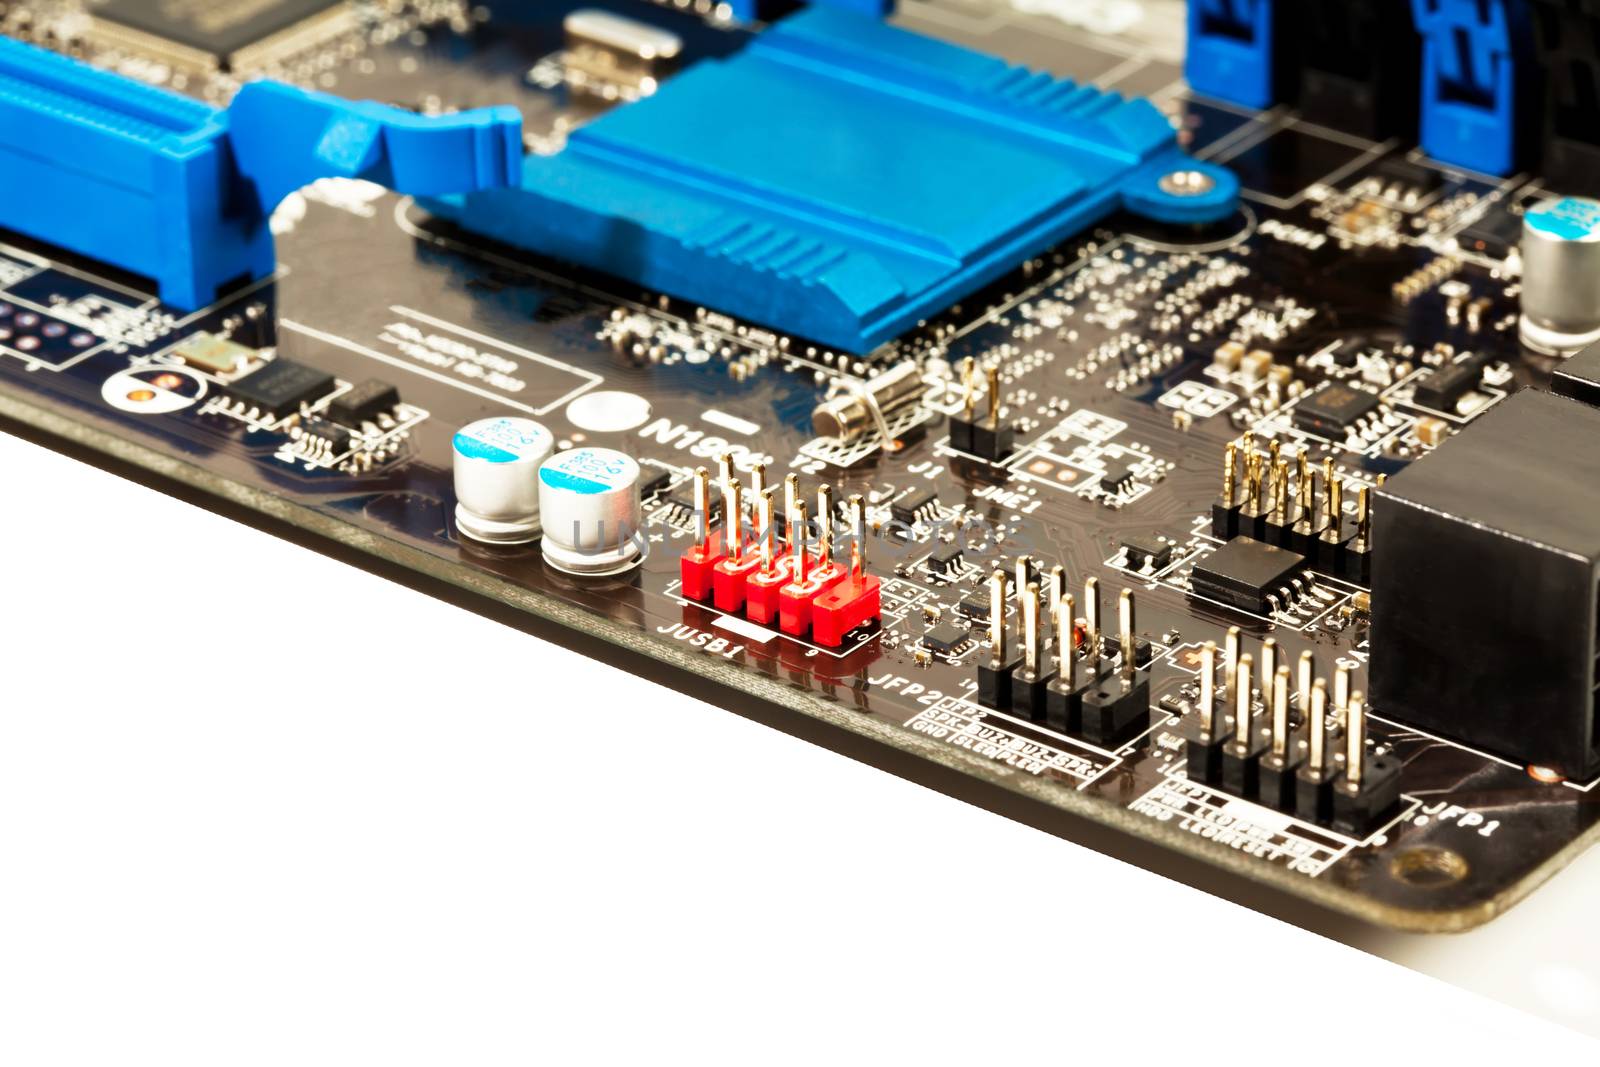 Part of laptop motherboard closeup by RawGroup